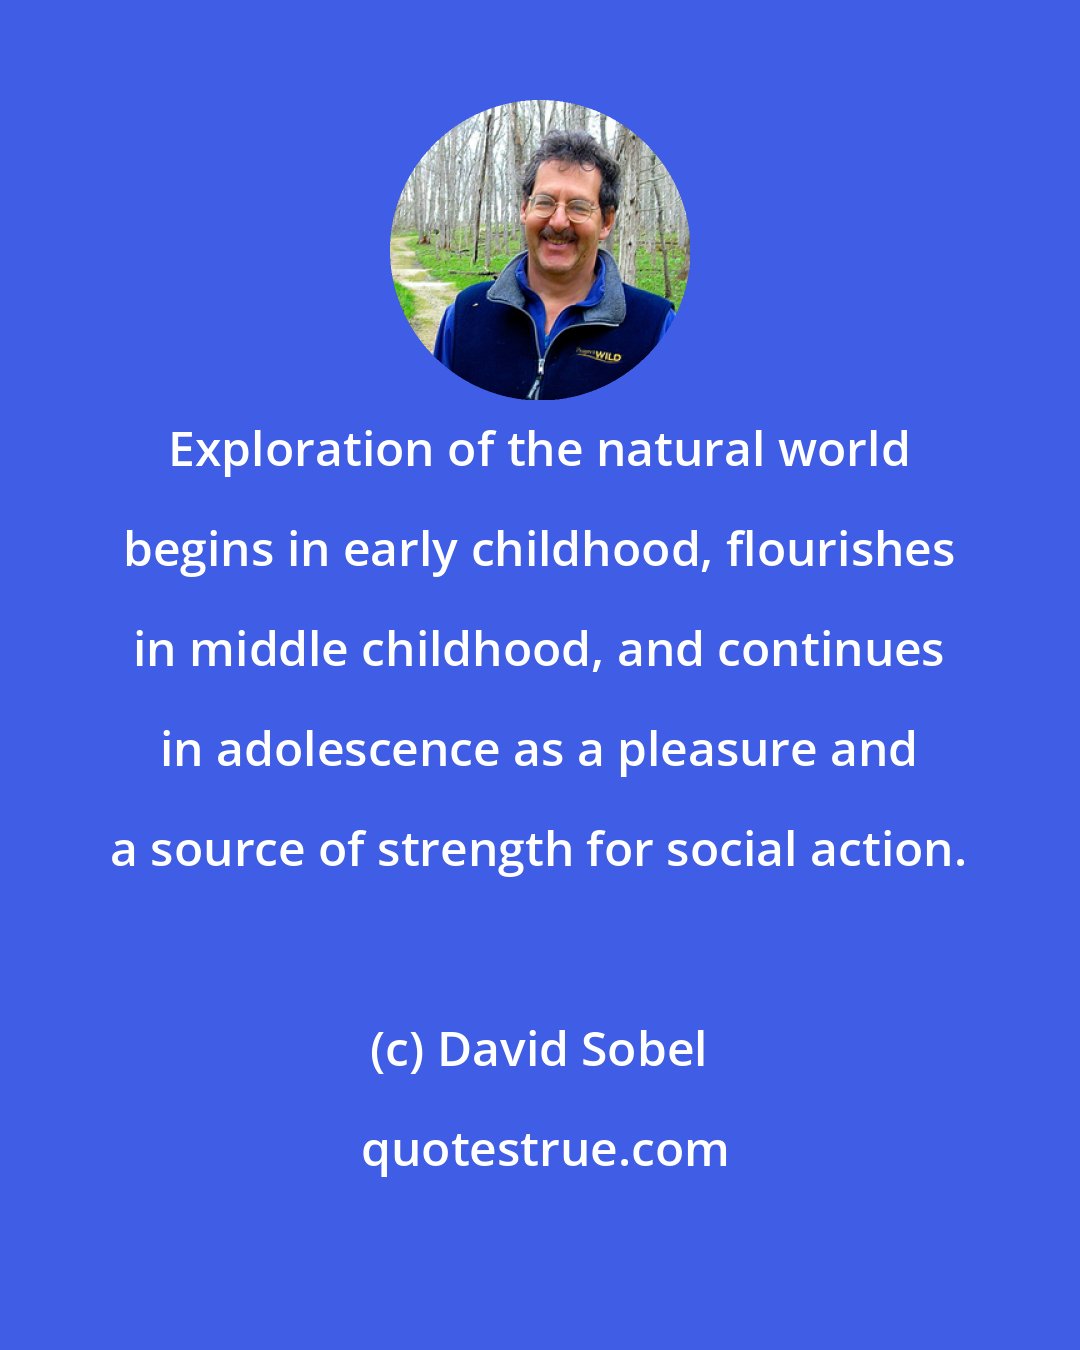 David Sobel: Exploration of the natural world begins in early childhood, flourishes in middle childhood, and continues in adolescence as a pleasure and a source of strength for social action.